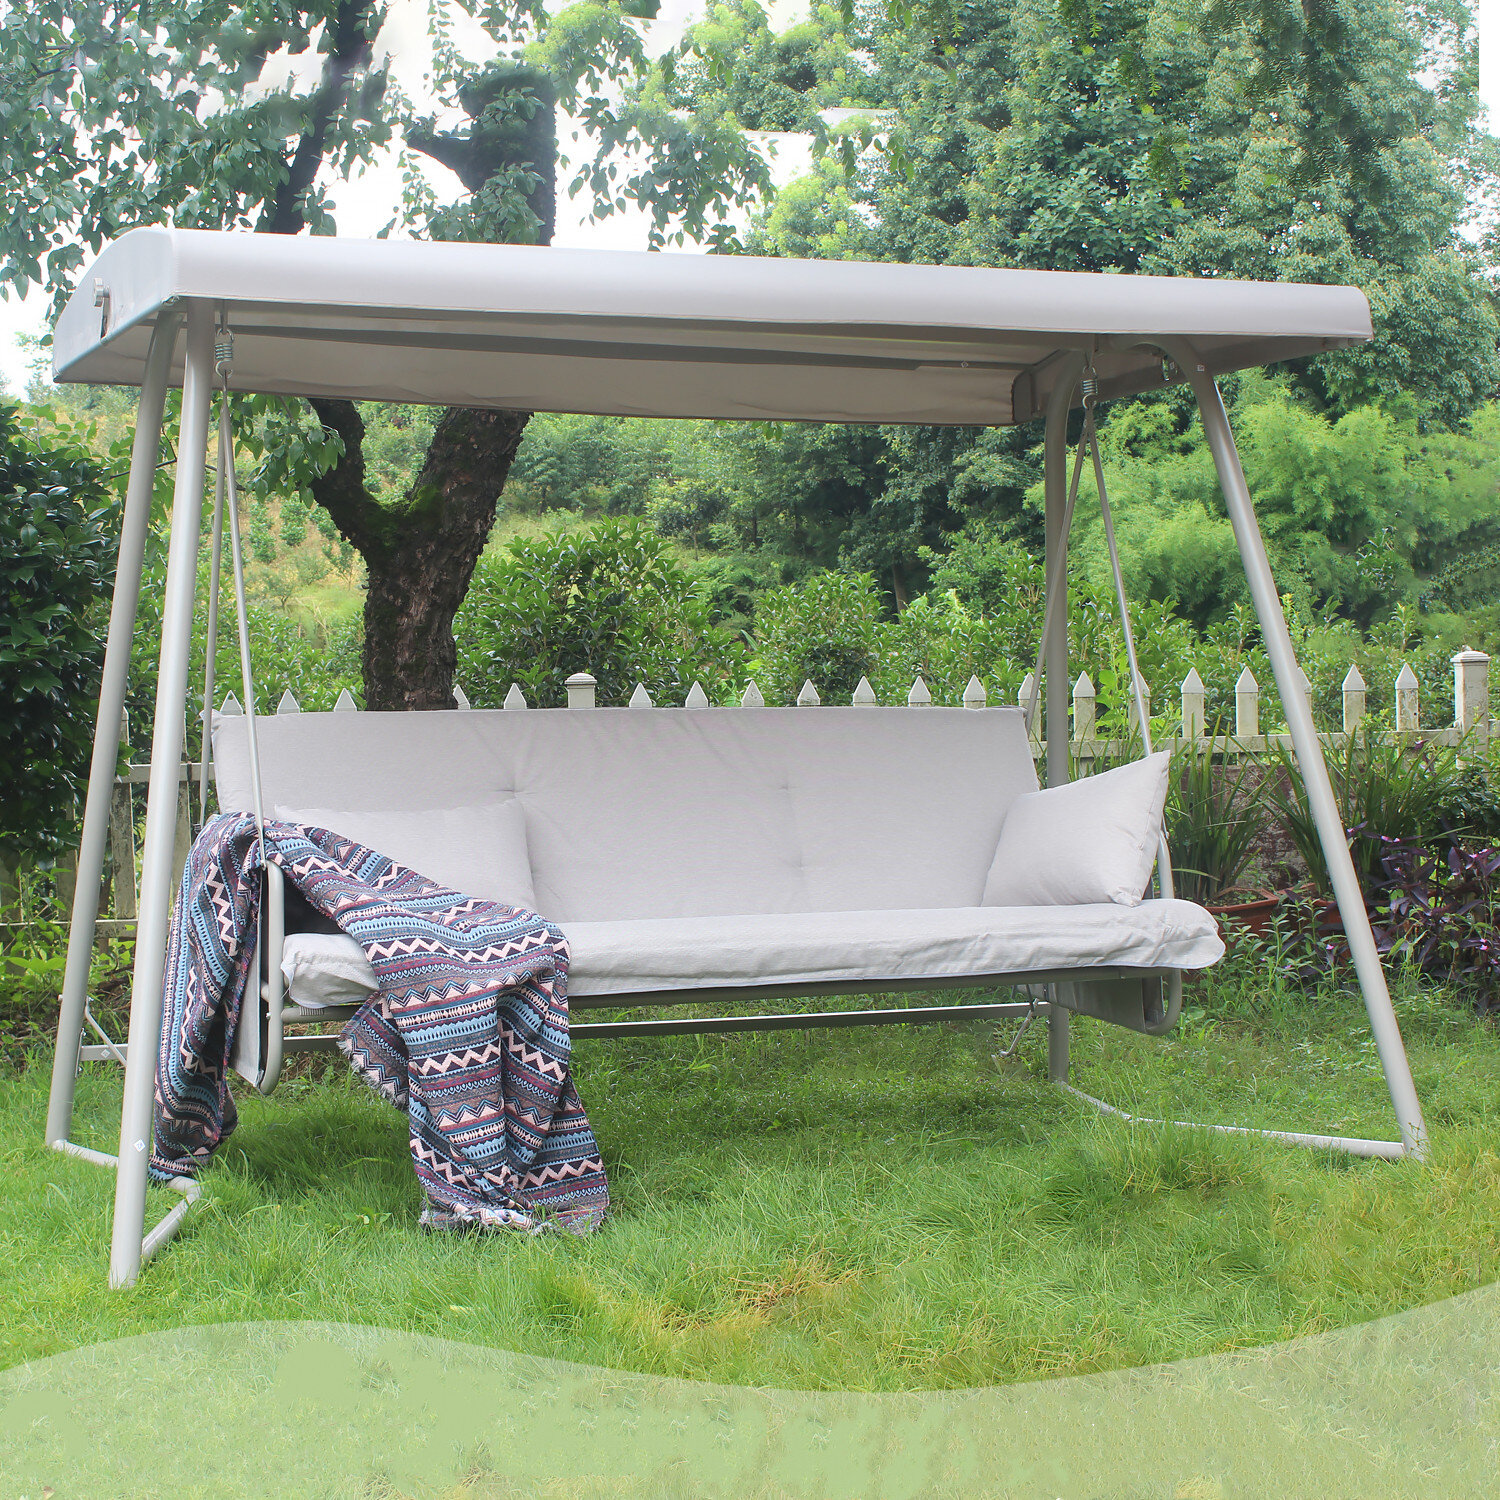 Details about   3 SEATER GARDEN SWING CHAIR SEAT HAMMOCK SWINGING TERRACE CANOPY BENCH 